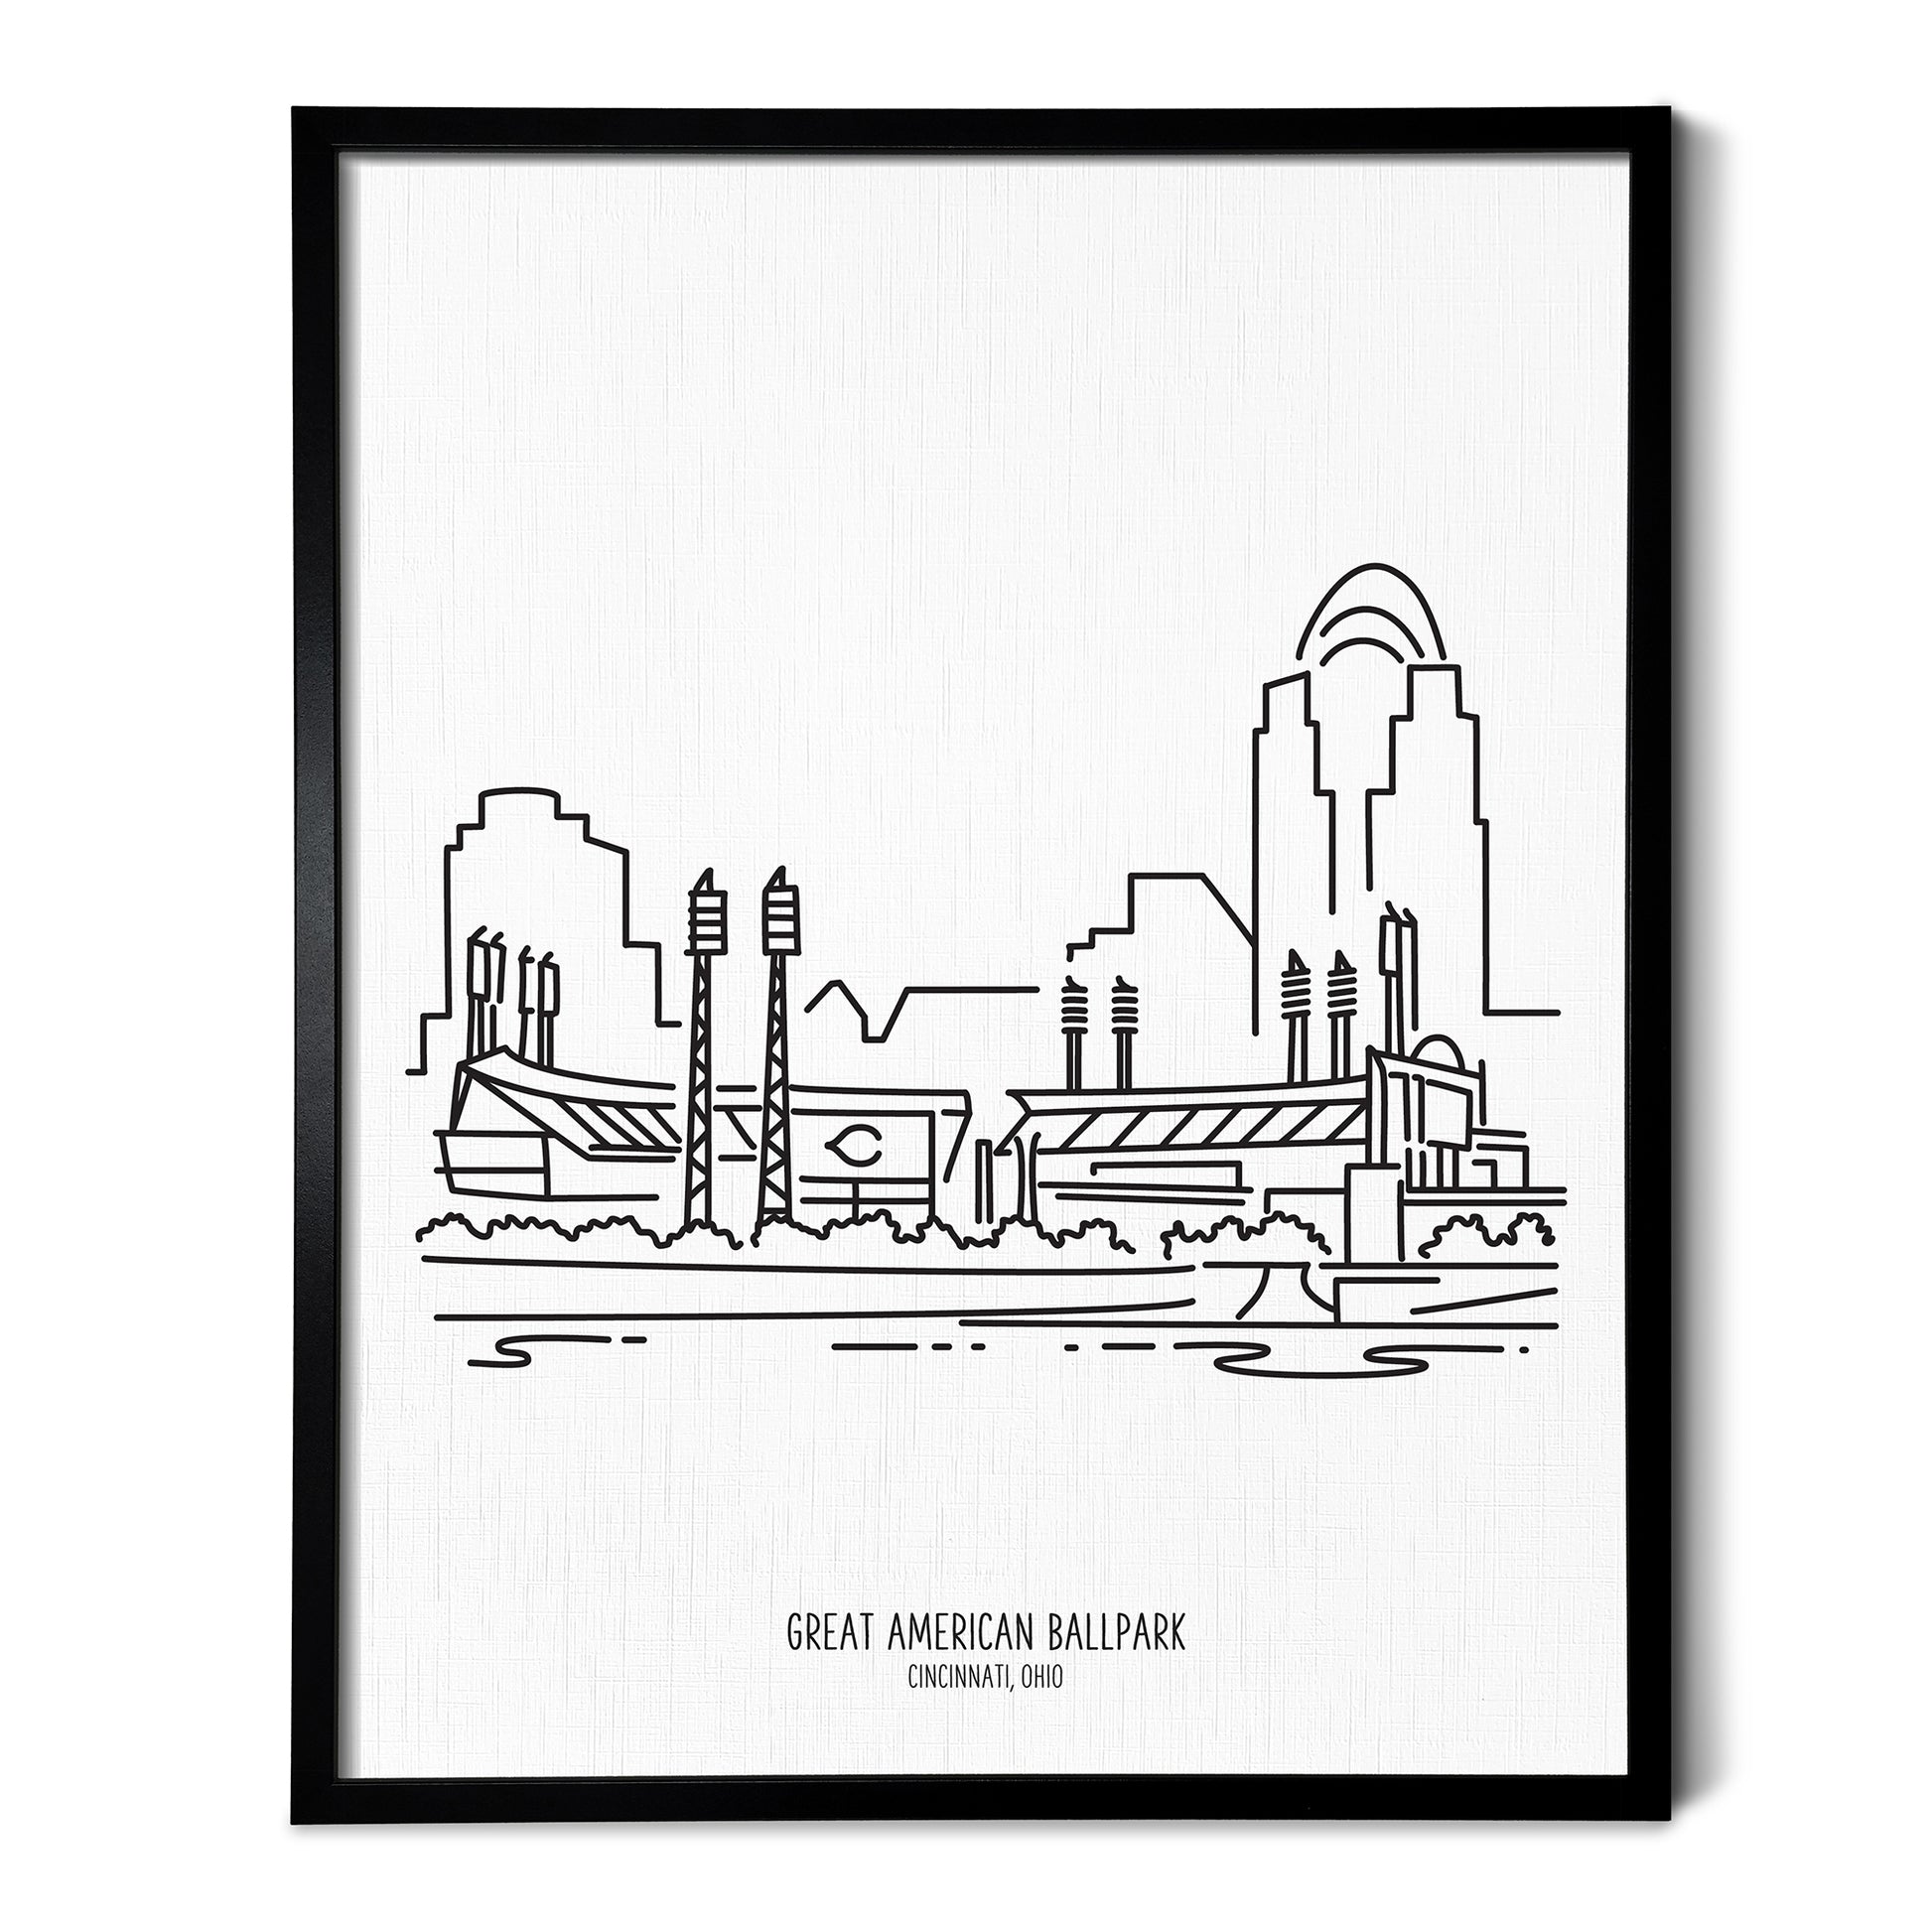 Custom line art drawings of the Cincinnati Reds Great American Ballpark on white linen paper in a thin black picture frames